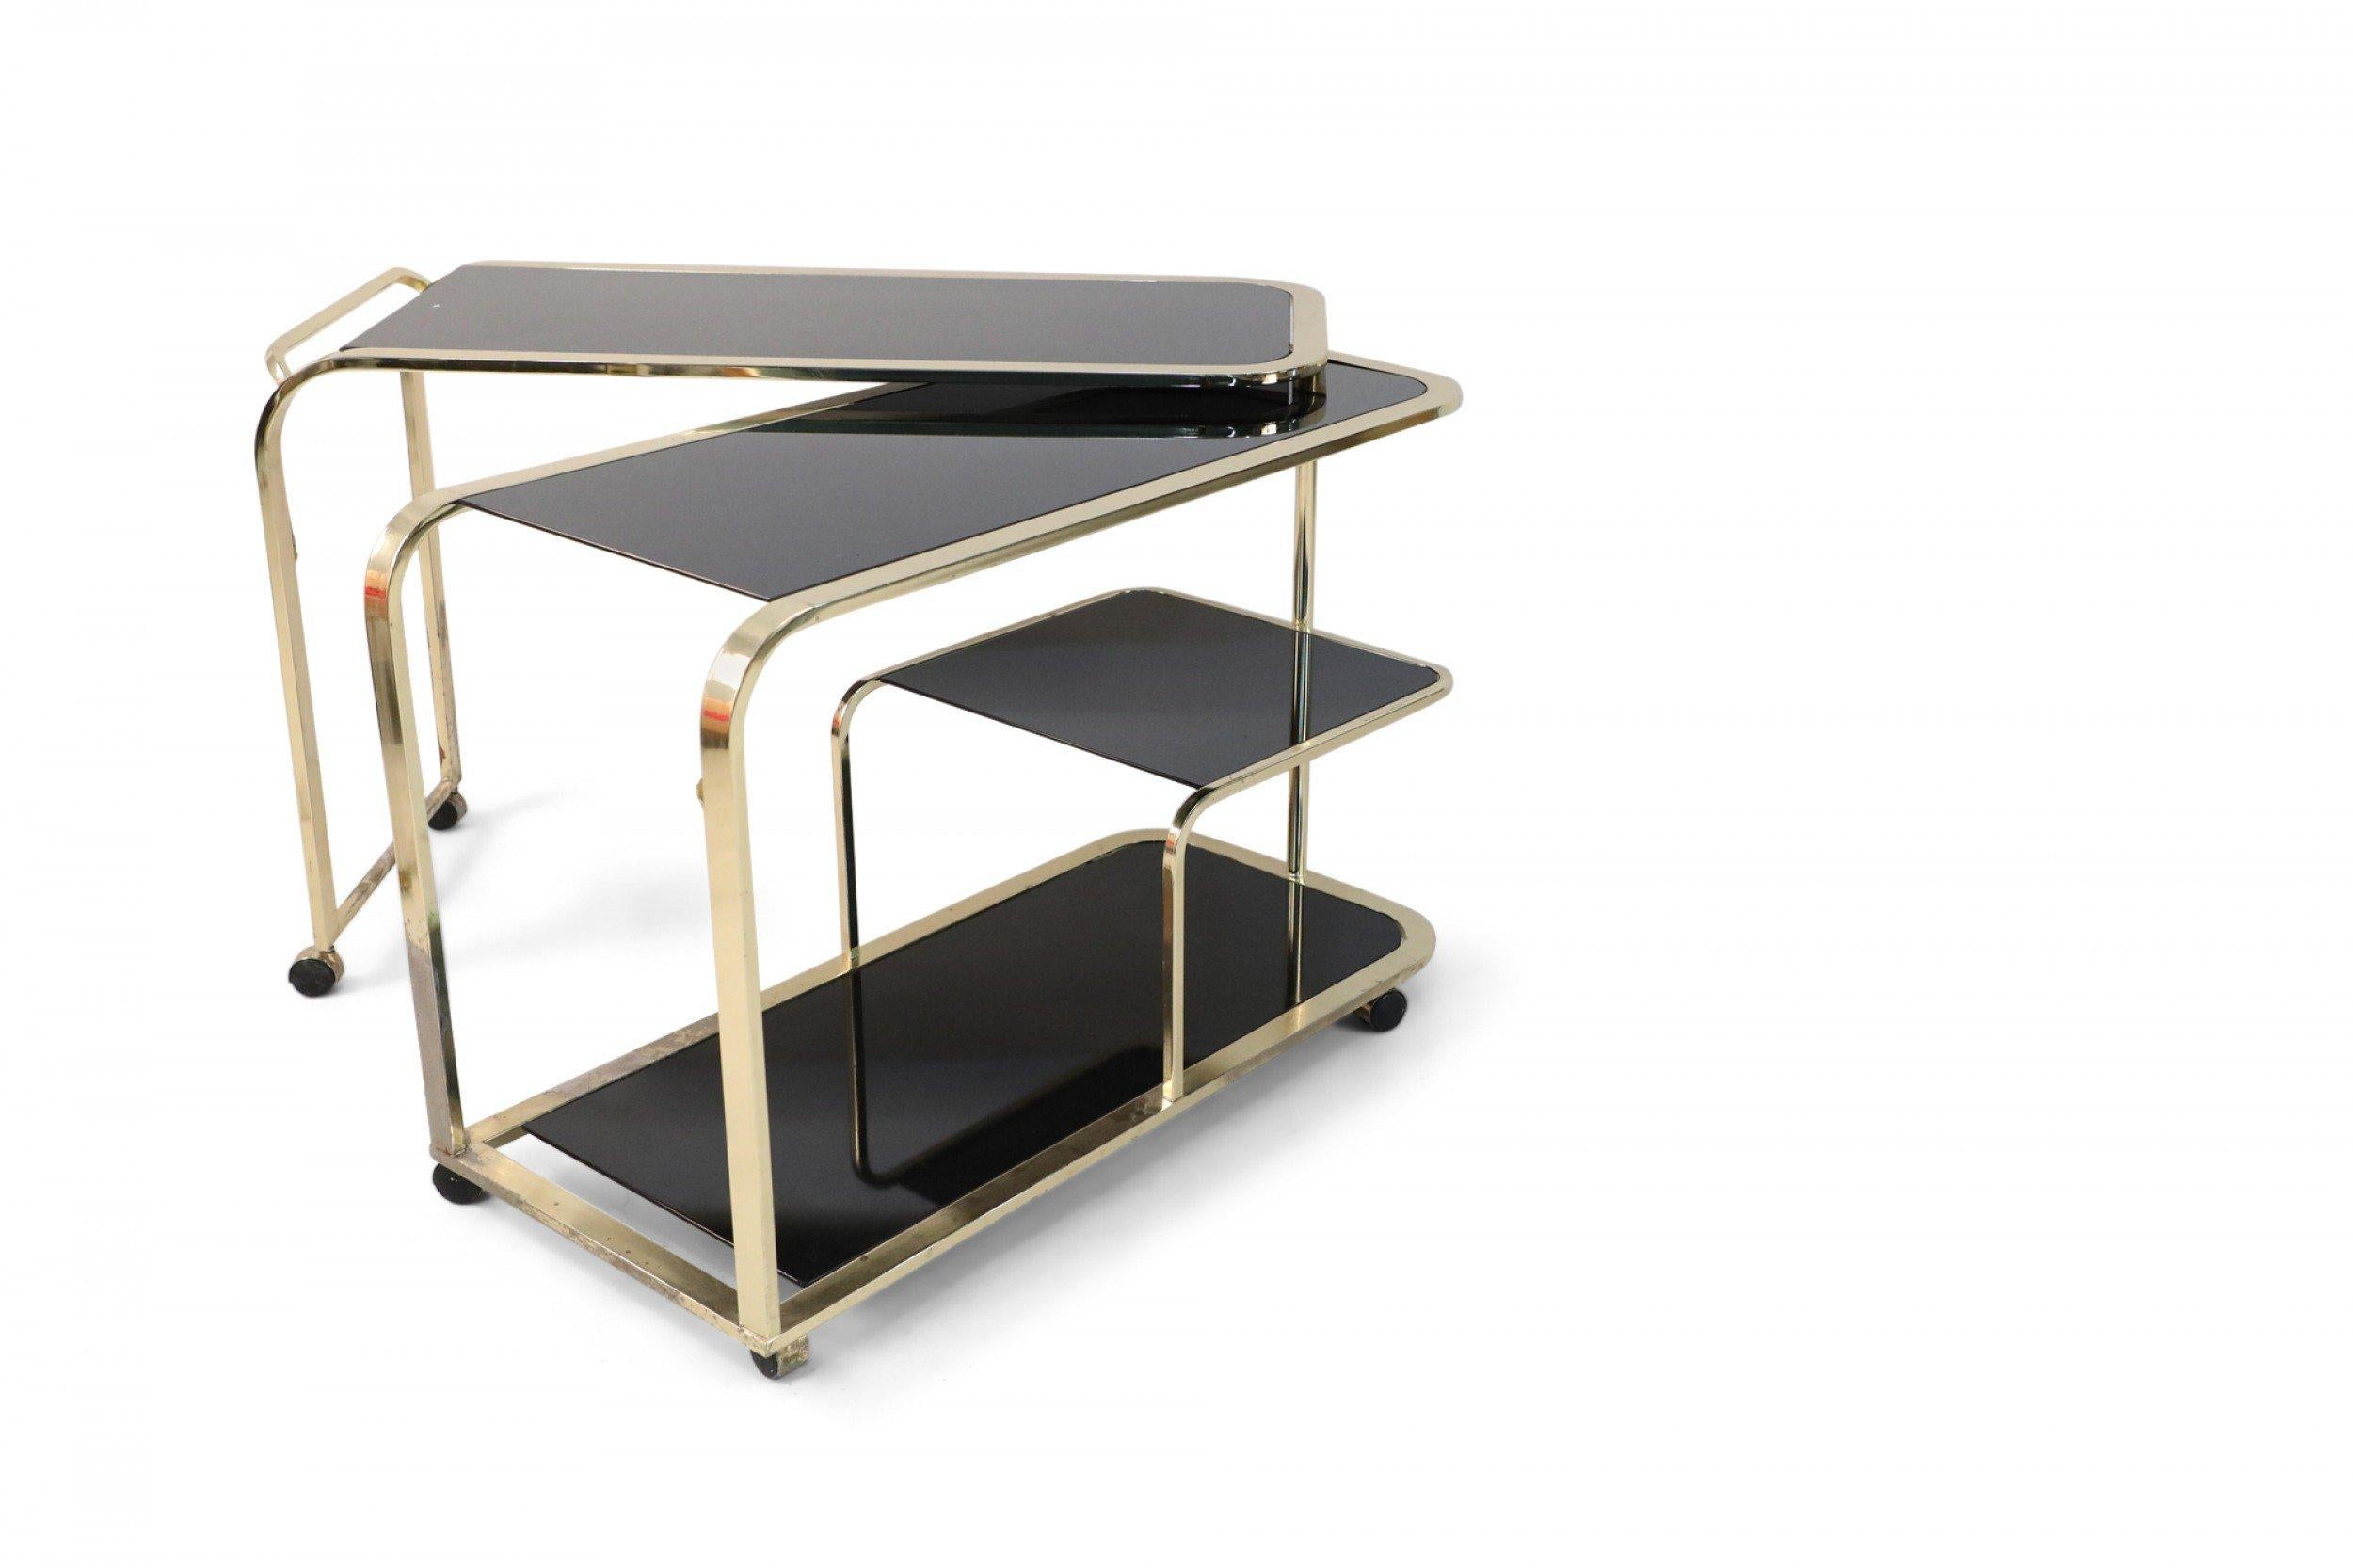 20th Century Design Institute of America Mid-Century Gilt Metal and Black Glass Bar Cart For Sale